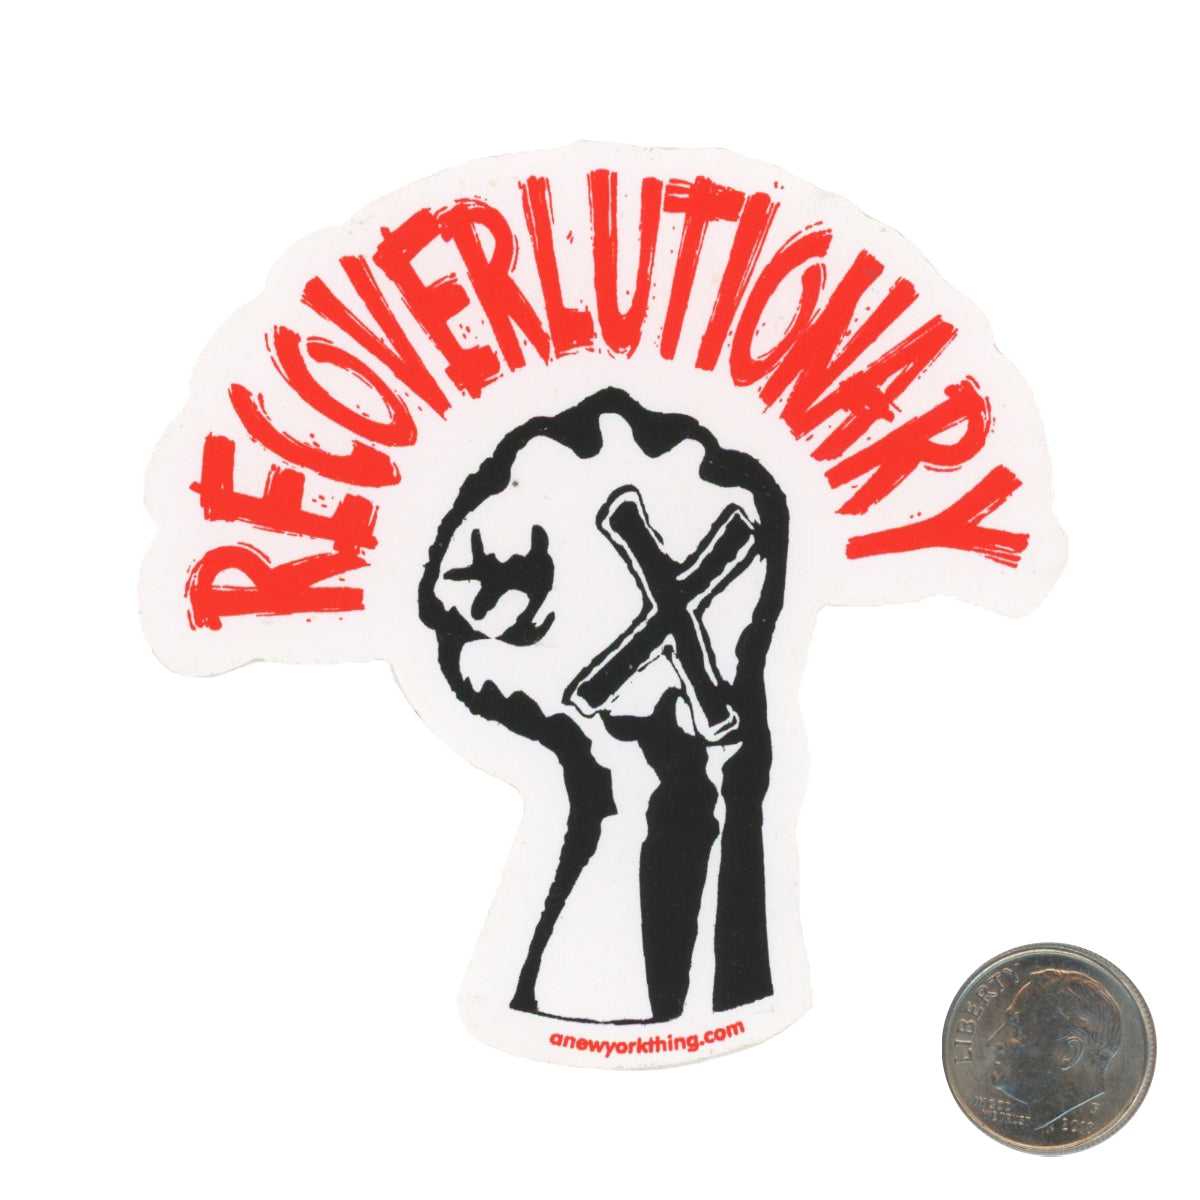 A NY Thing Recoverlutionary Sticker with dime